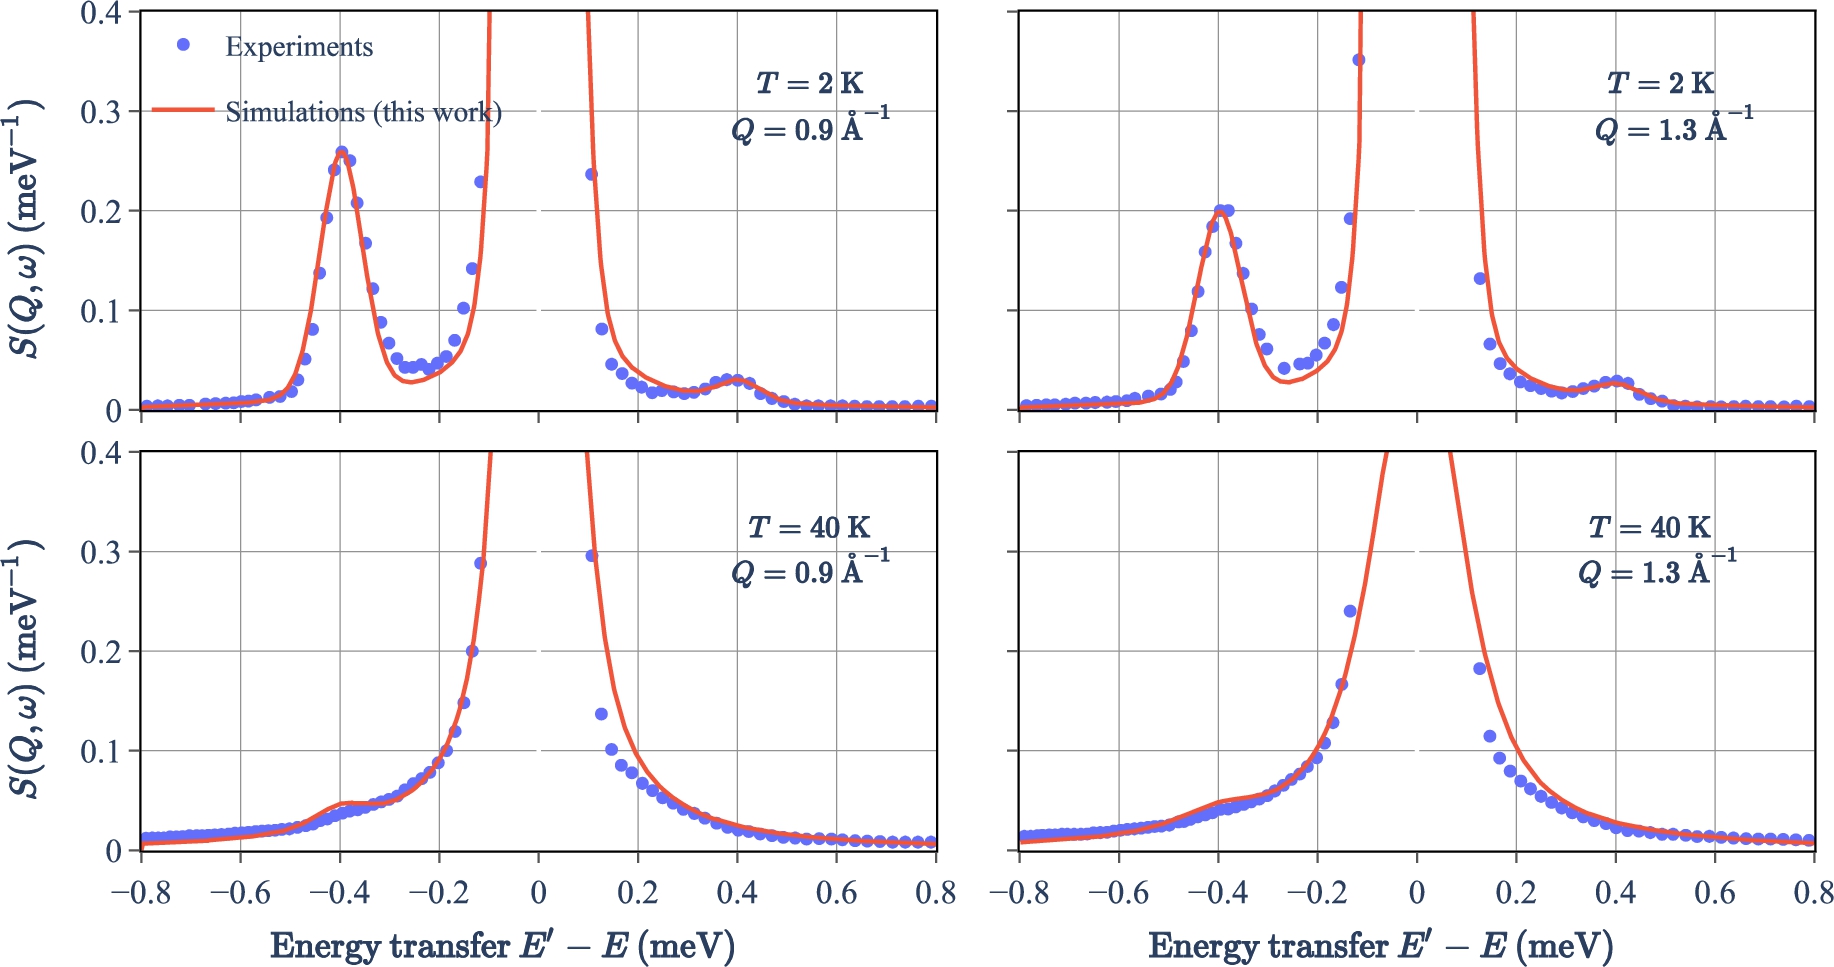 Comparisons between simulated and experimental S(Q,ω) on O2-clathrate [39] at 2 K and 40 K.